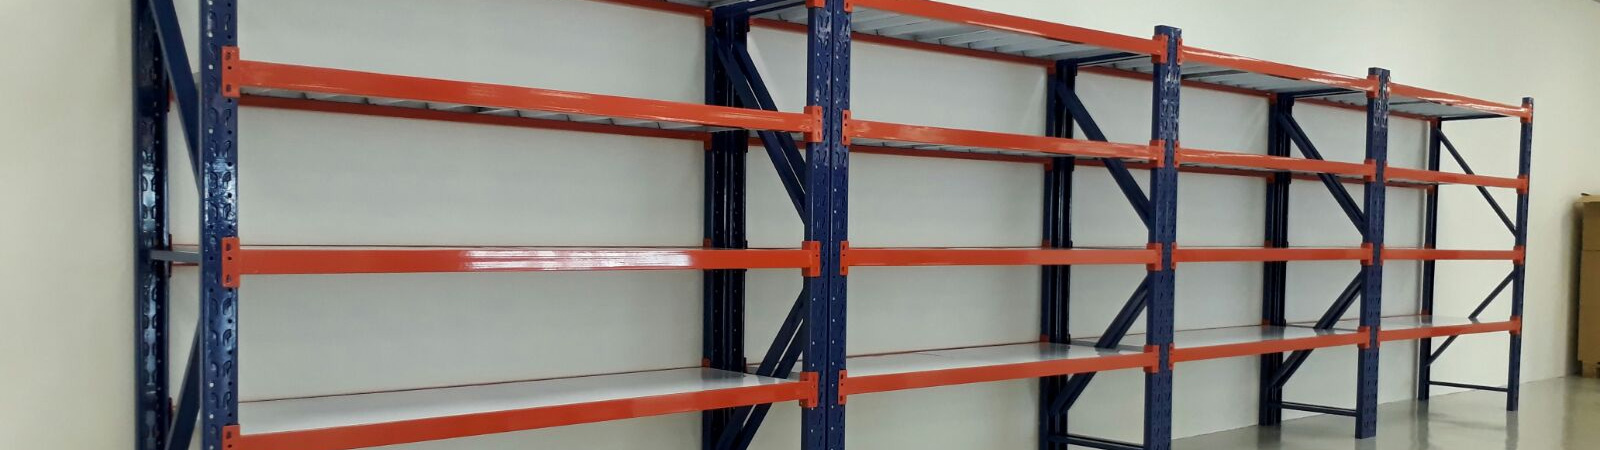 Heavy Duty Rack Manufacturers in Rajasthan